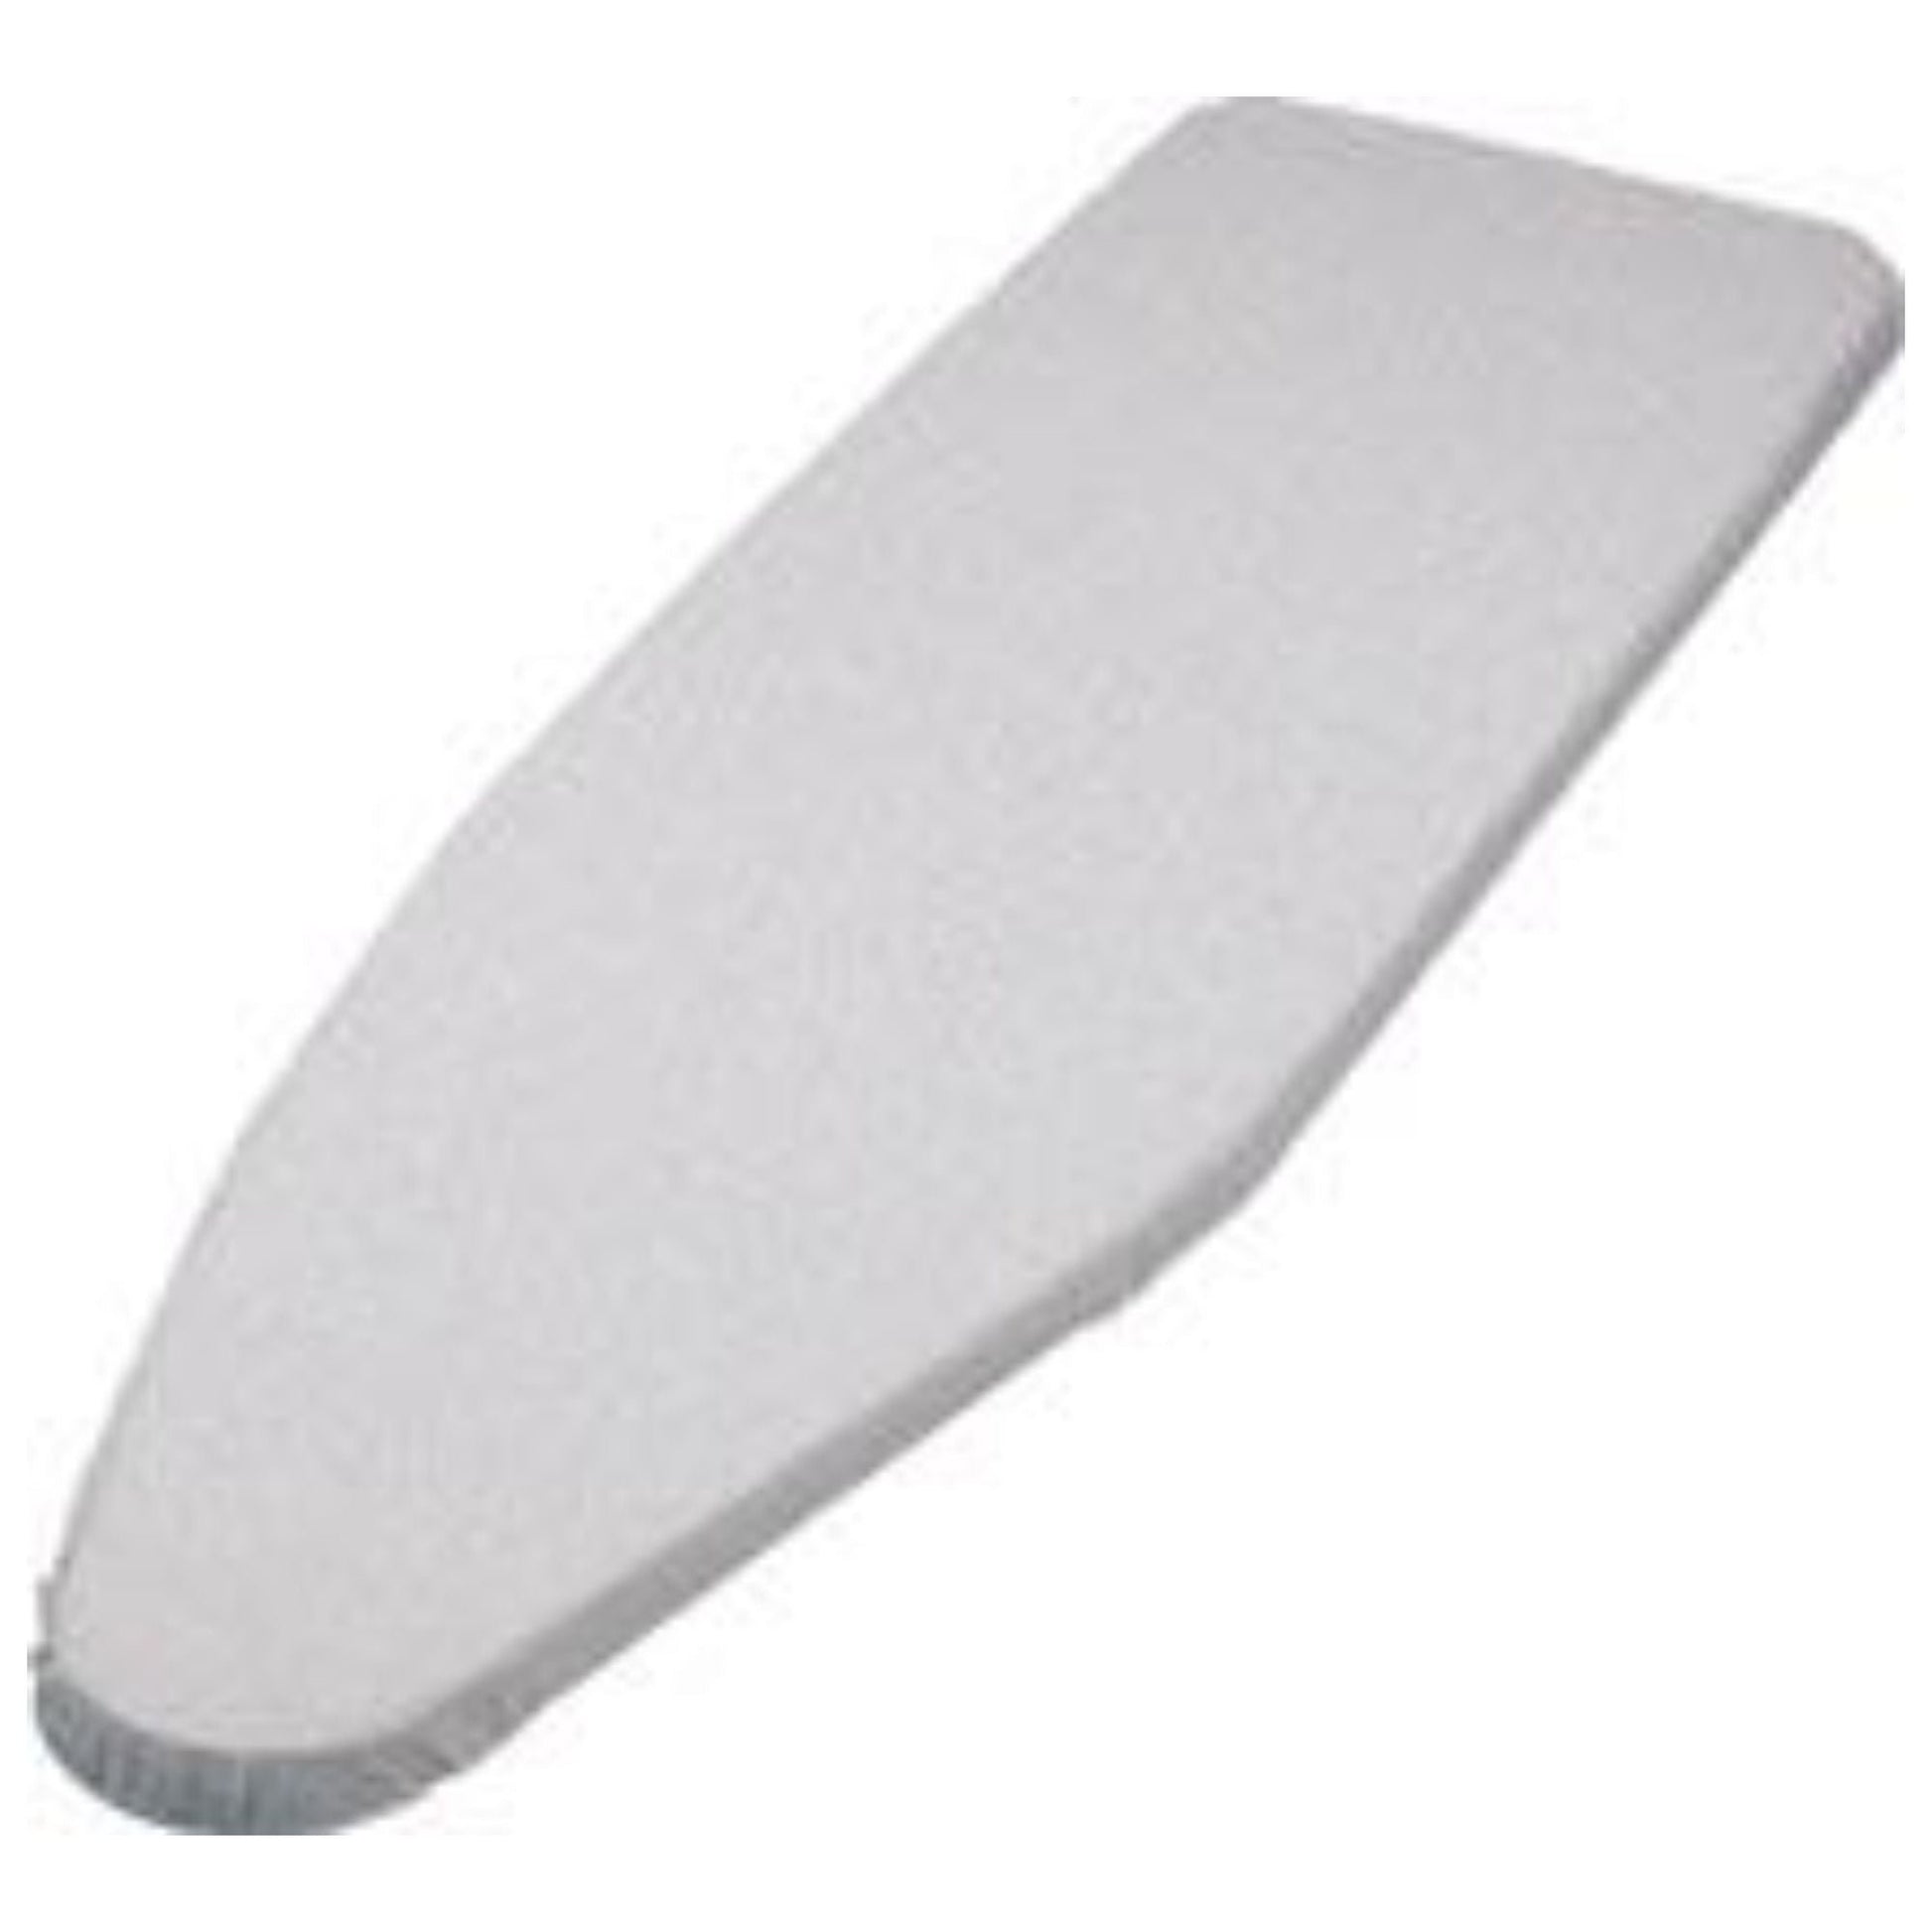 Pressto Valet Ironing Board Cover/Pad ~ Silver